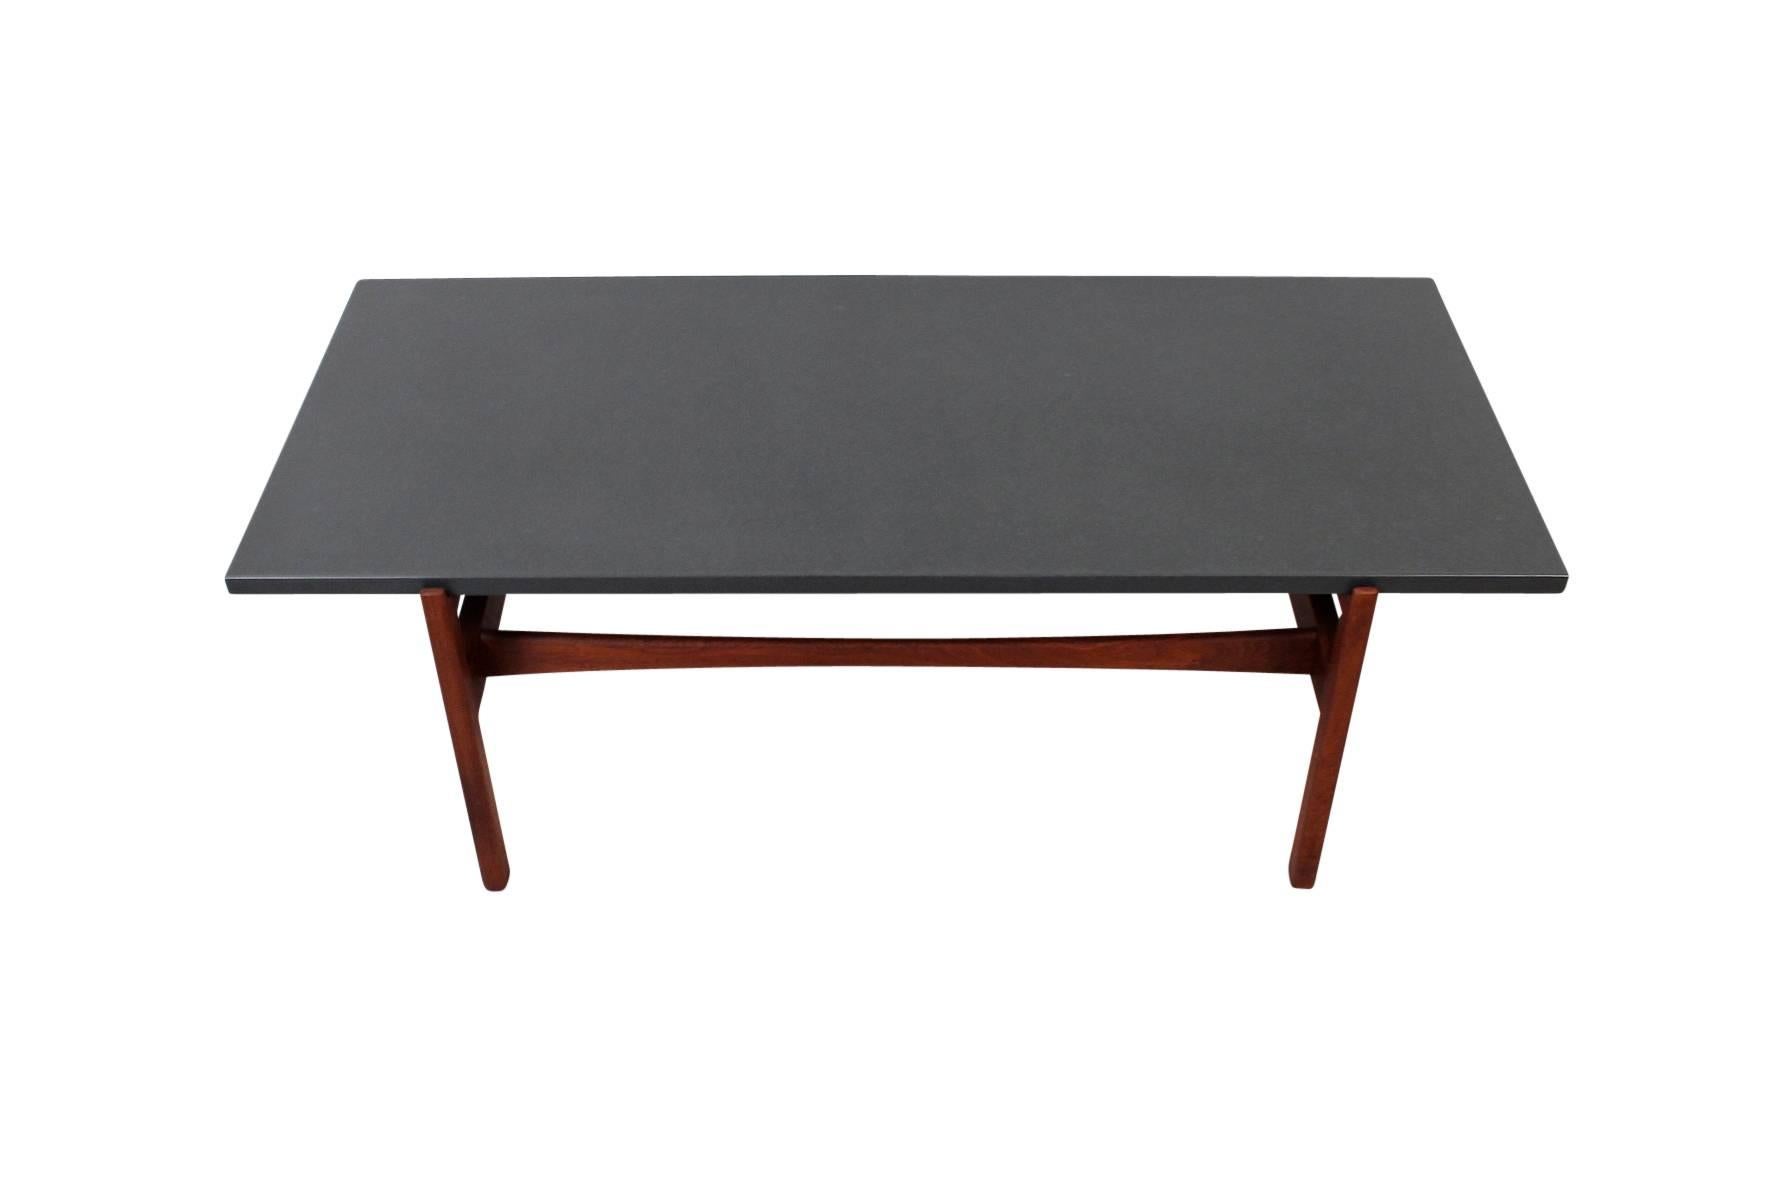 Rare coffee table model by Jens Risom with floating slate top over a walnut base. A gift from Risom to former owner.
 